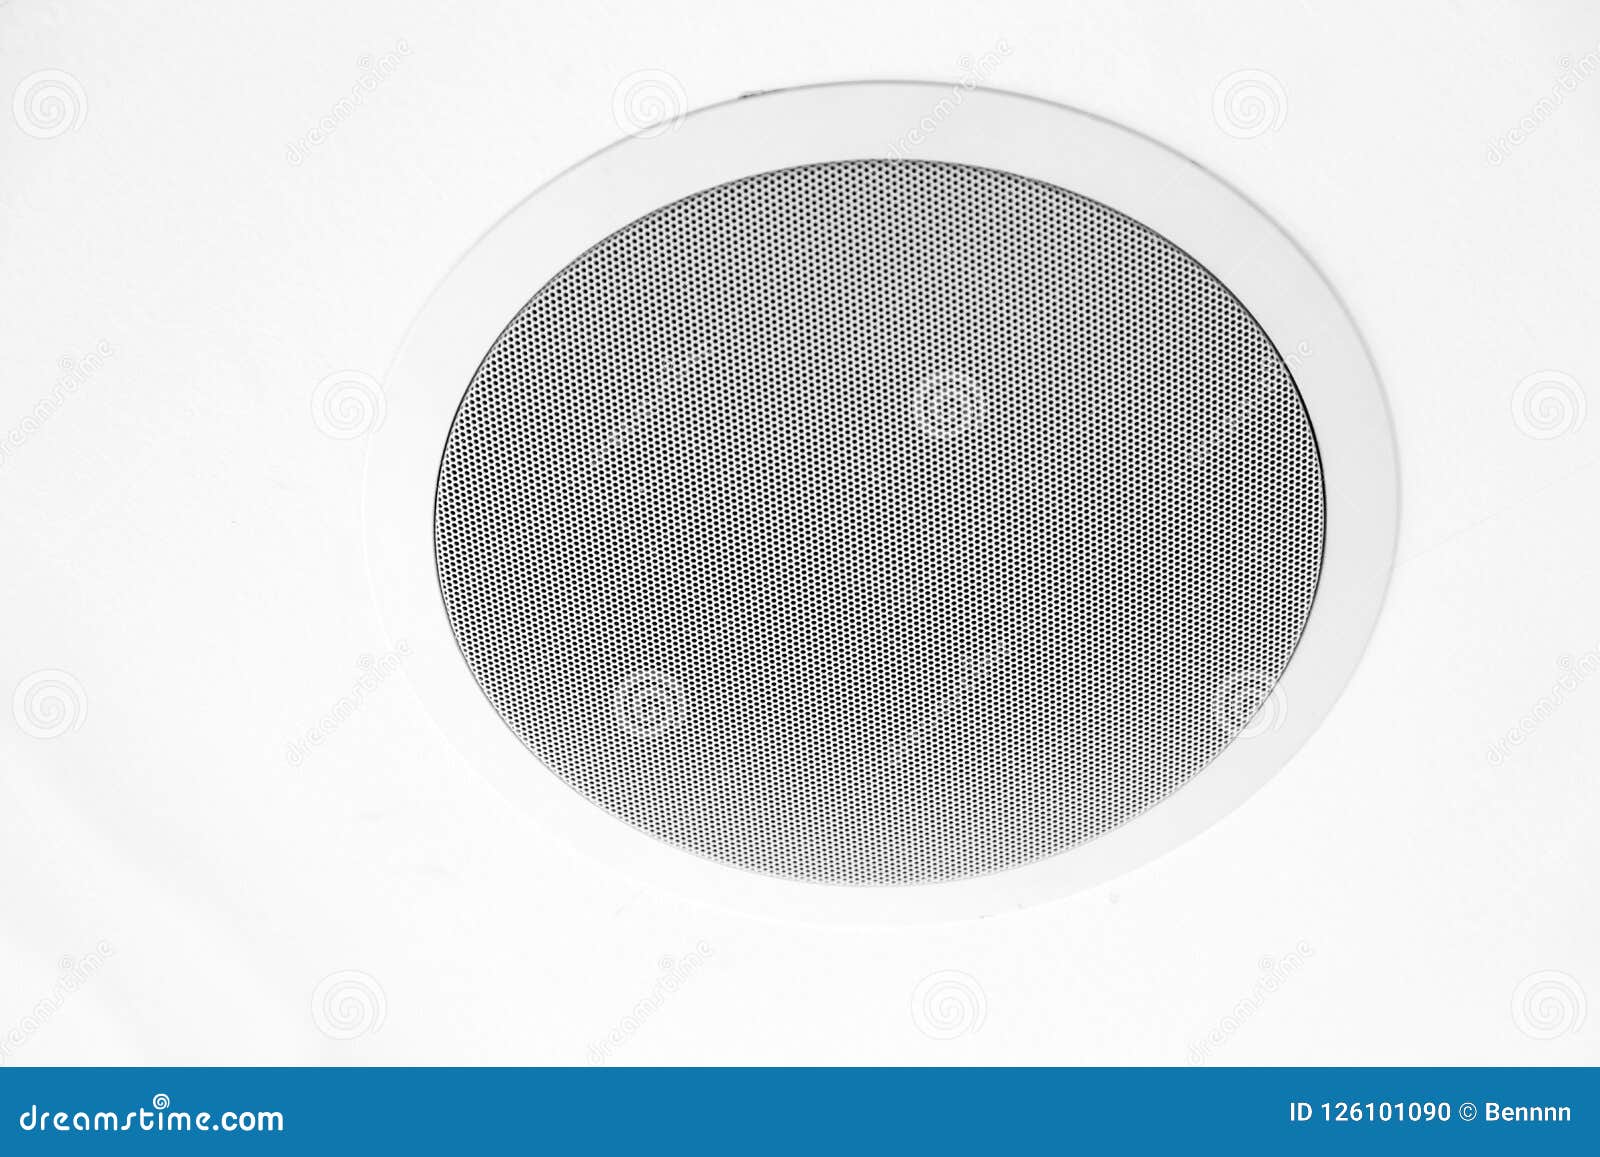 White Speaker And Grille Hanging On White Ceiling Stock